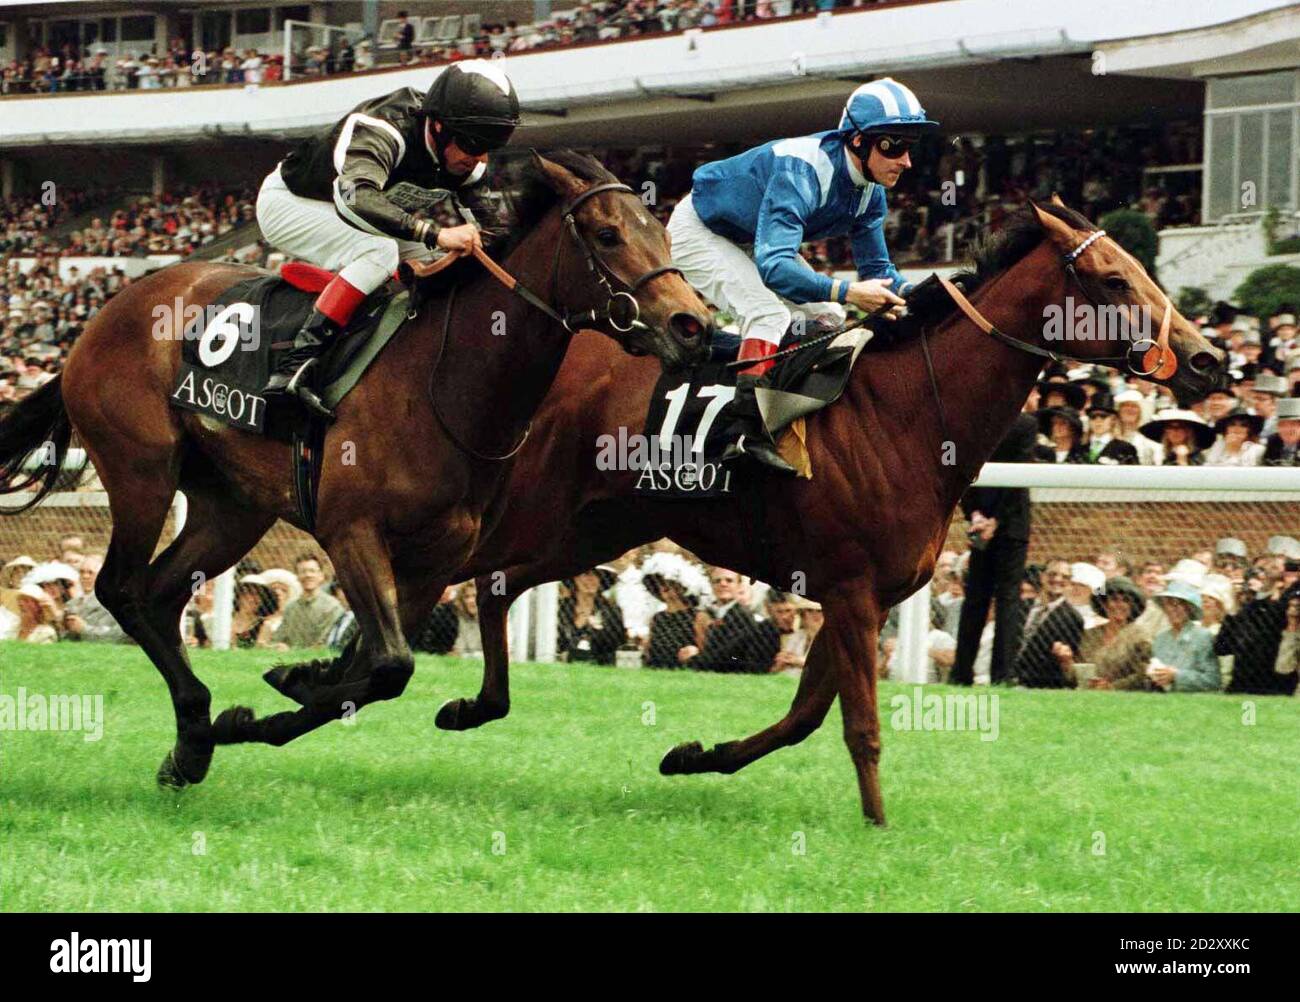 Nadwah (No17), with Richard Hills up, leads to win the Queen Mary Stakes, from 2nd placed Crazee Mental, John Carroll up, at Royal Ascot today (Wed). Photo by Martyn Hayhow/PA Stock Photo